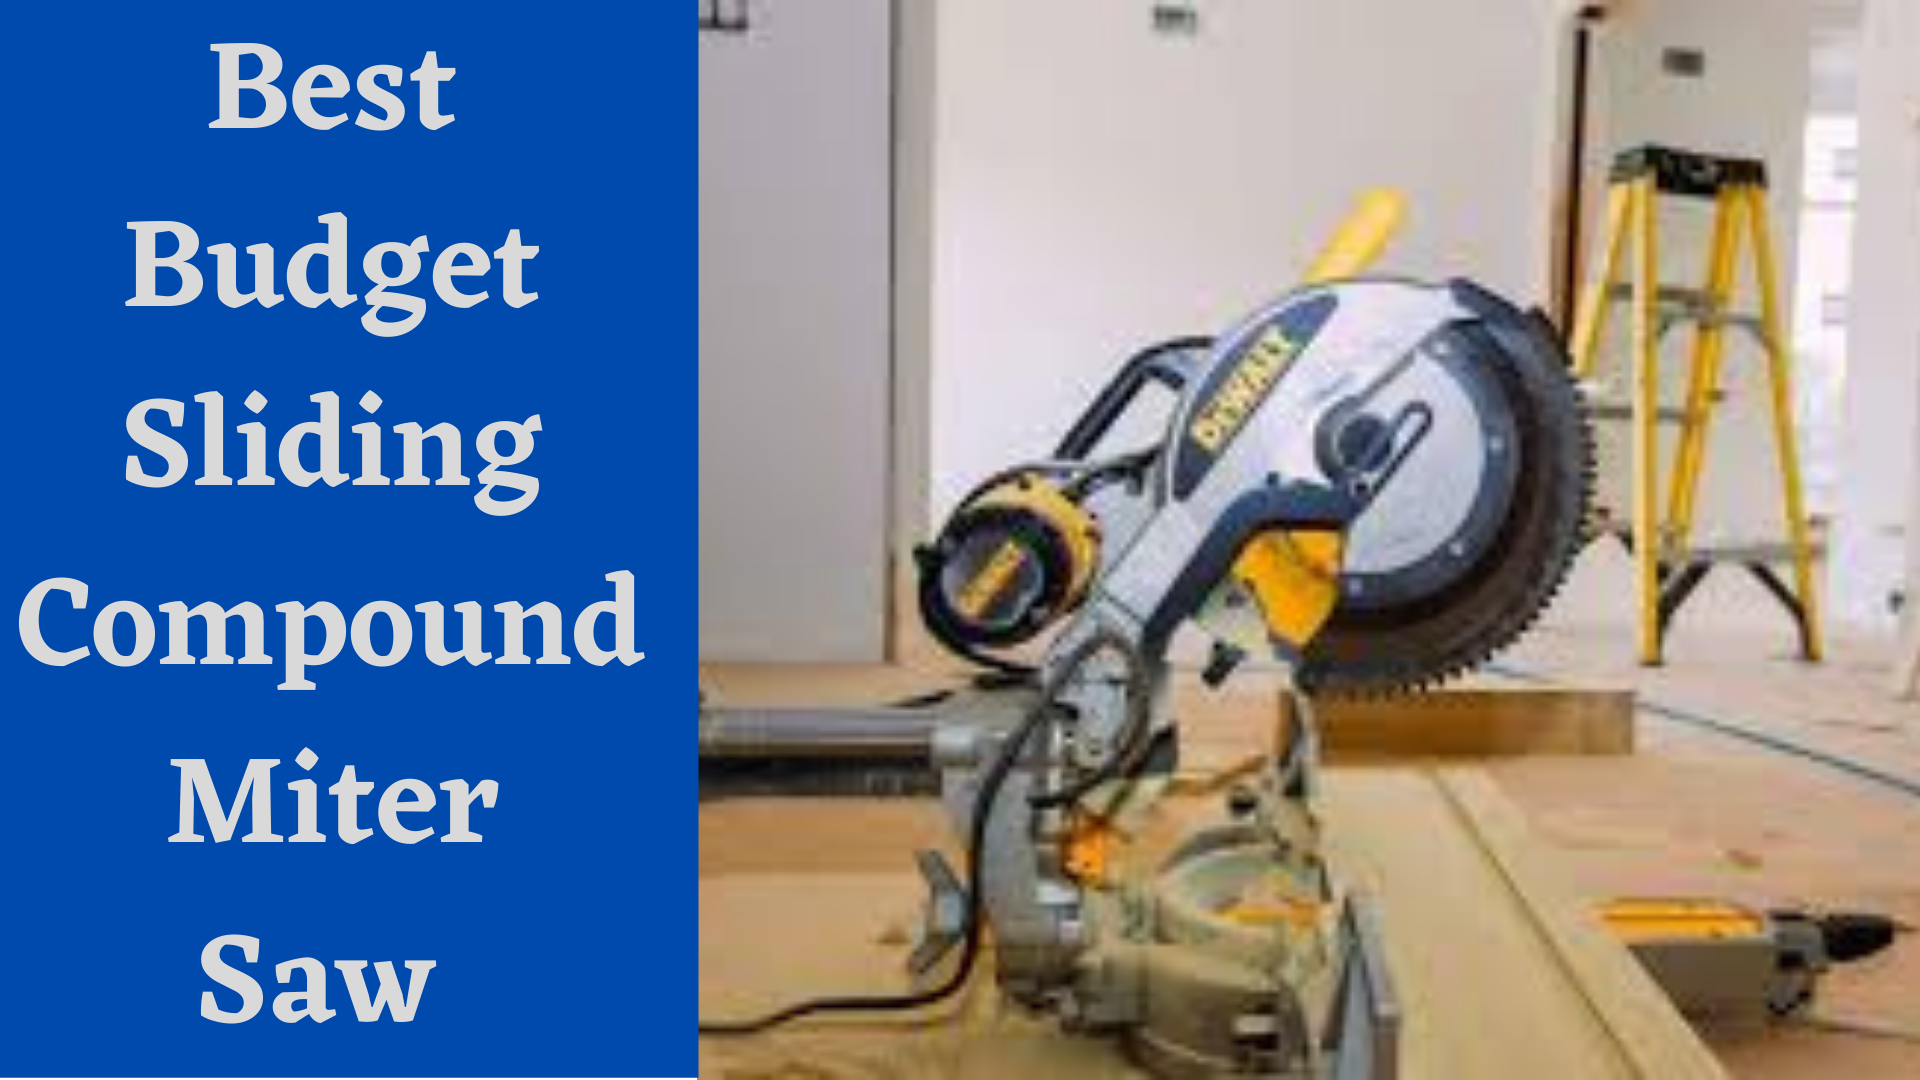 Absolute Best Budget Sliding Compound Miter Saw to Buy (2021 Review)